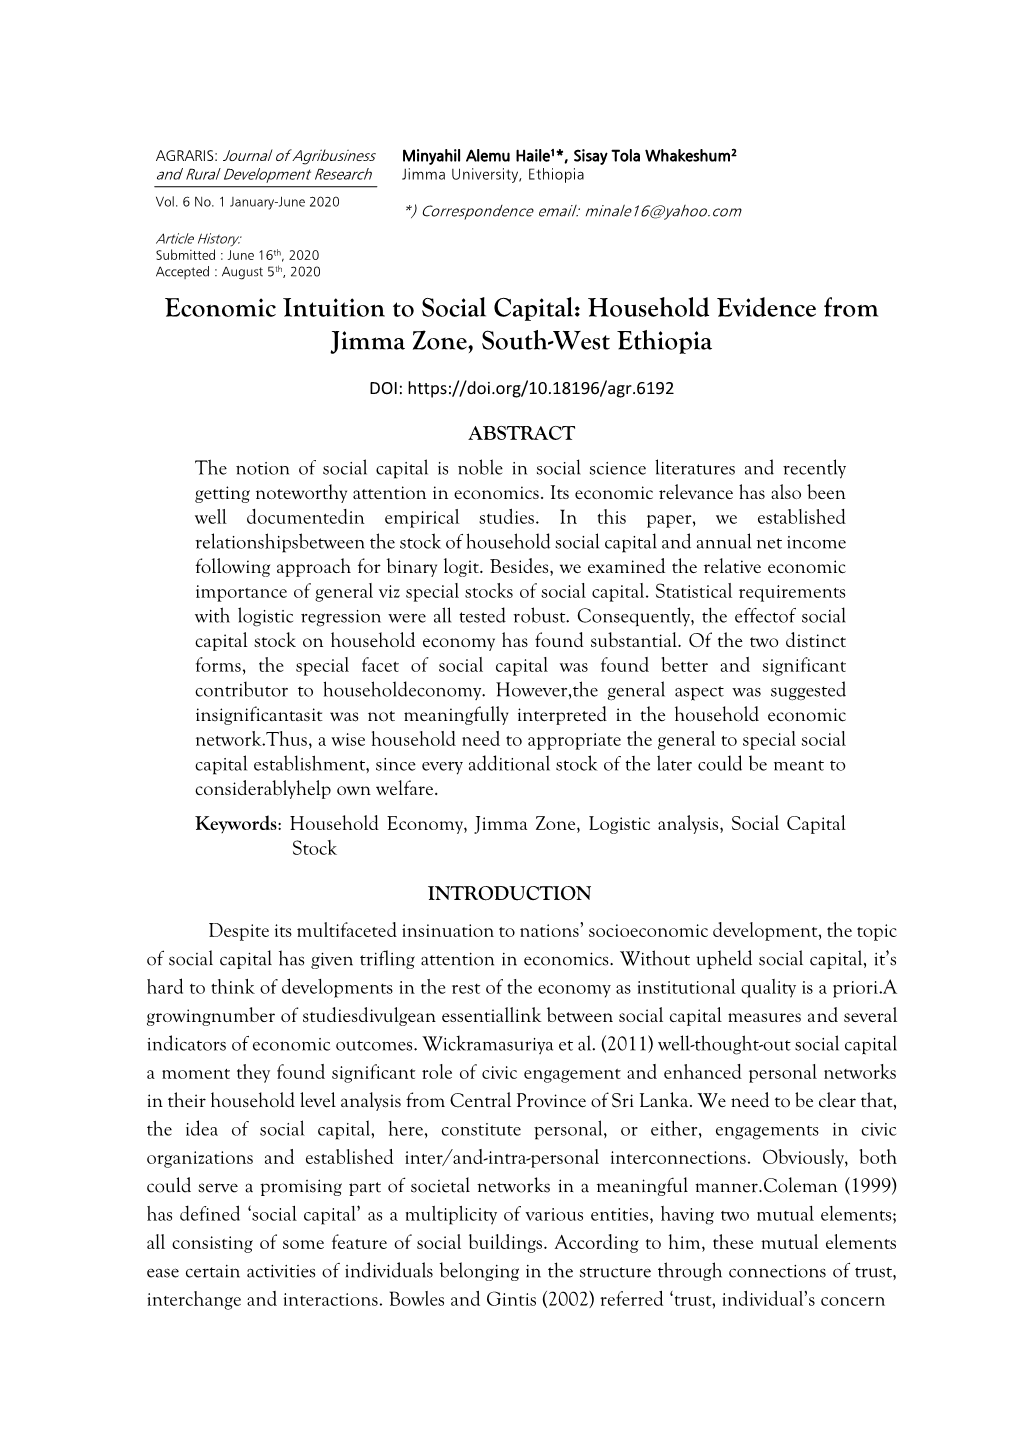 Economic Intuition to Social Capital: Household Evidence from Jimma Zone, South-West Ethiopia